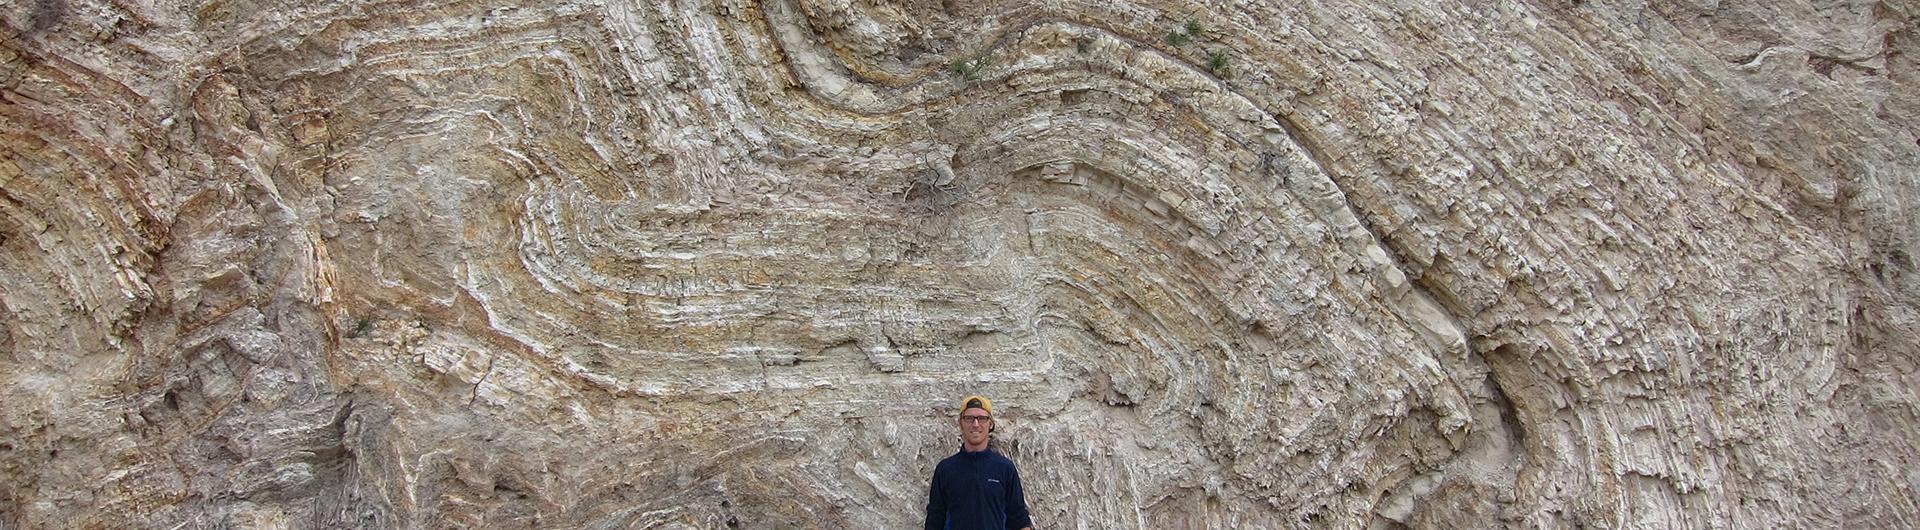 geology student posing in from of a rock formation